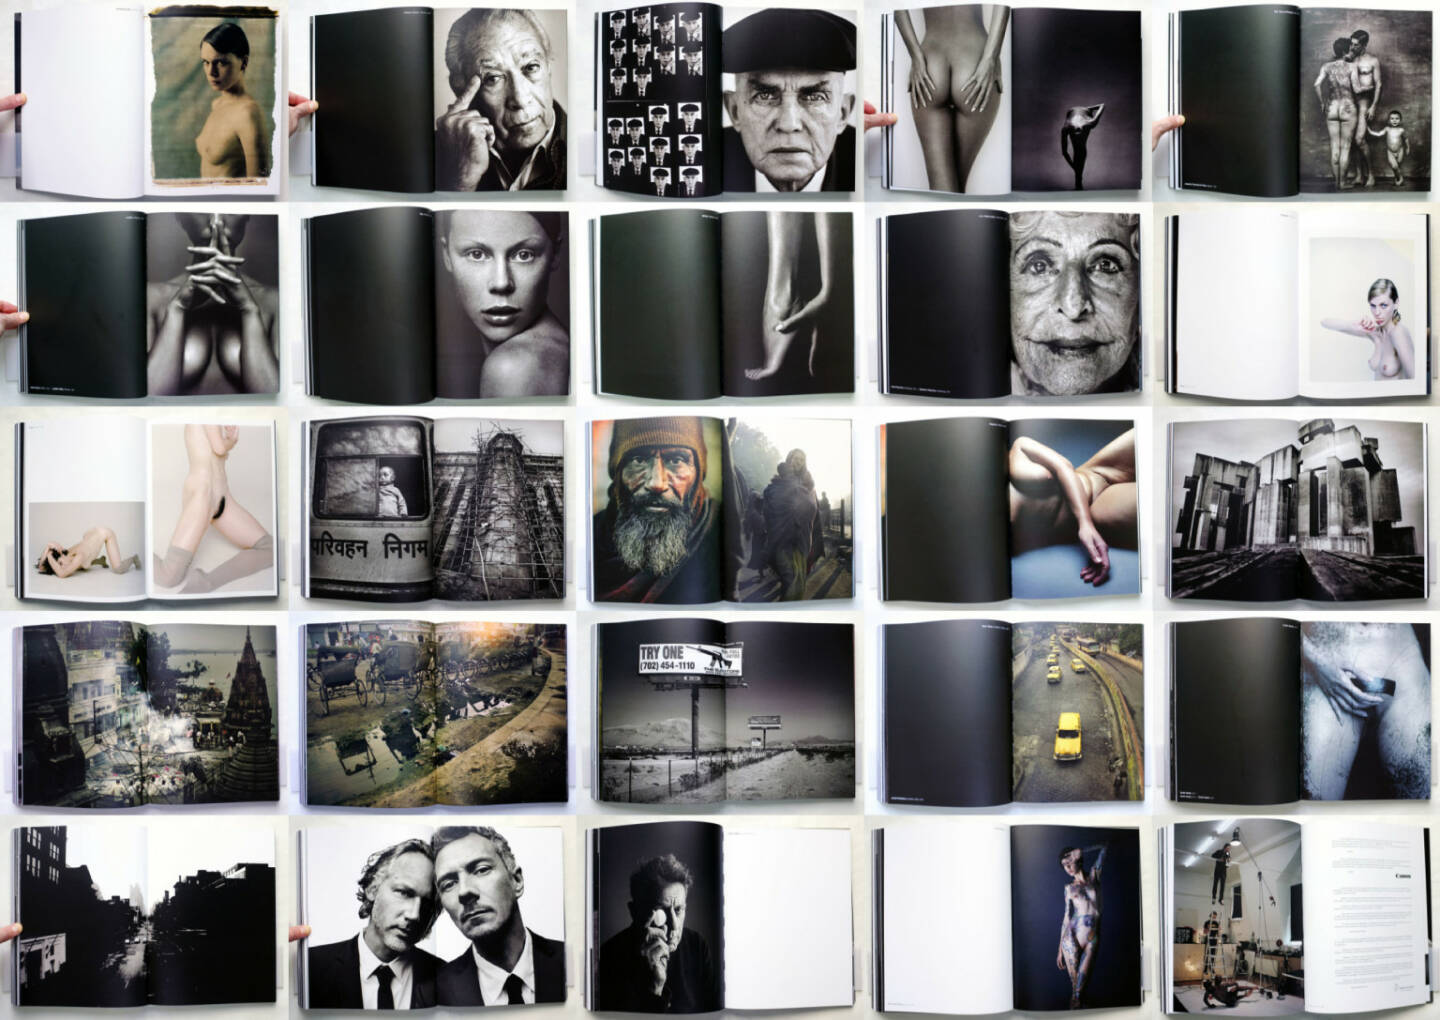 Andreas H. Bitesnich - So far - 25 years of photography, Room5Books 2014, Beispielseiten, sample spreads - http://josefchladek.com/book/andreas_bitesnich_-_so_far_-_25_years_of_photography